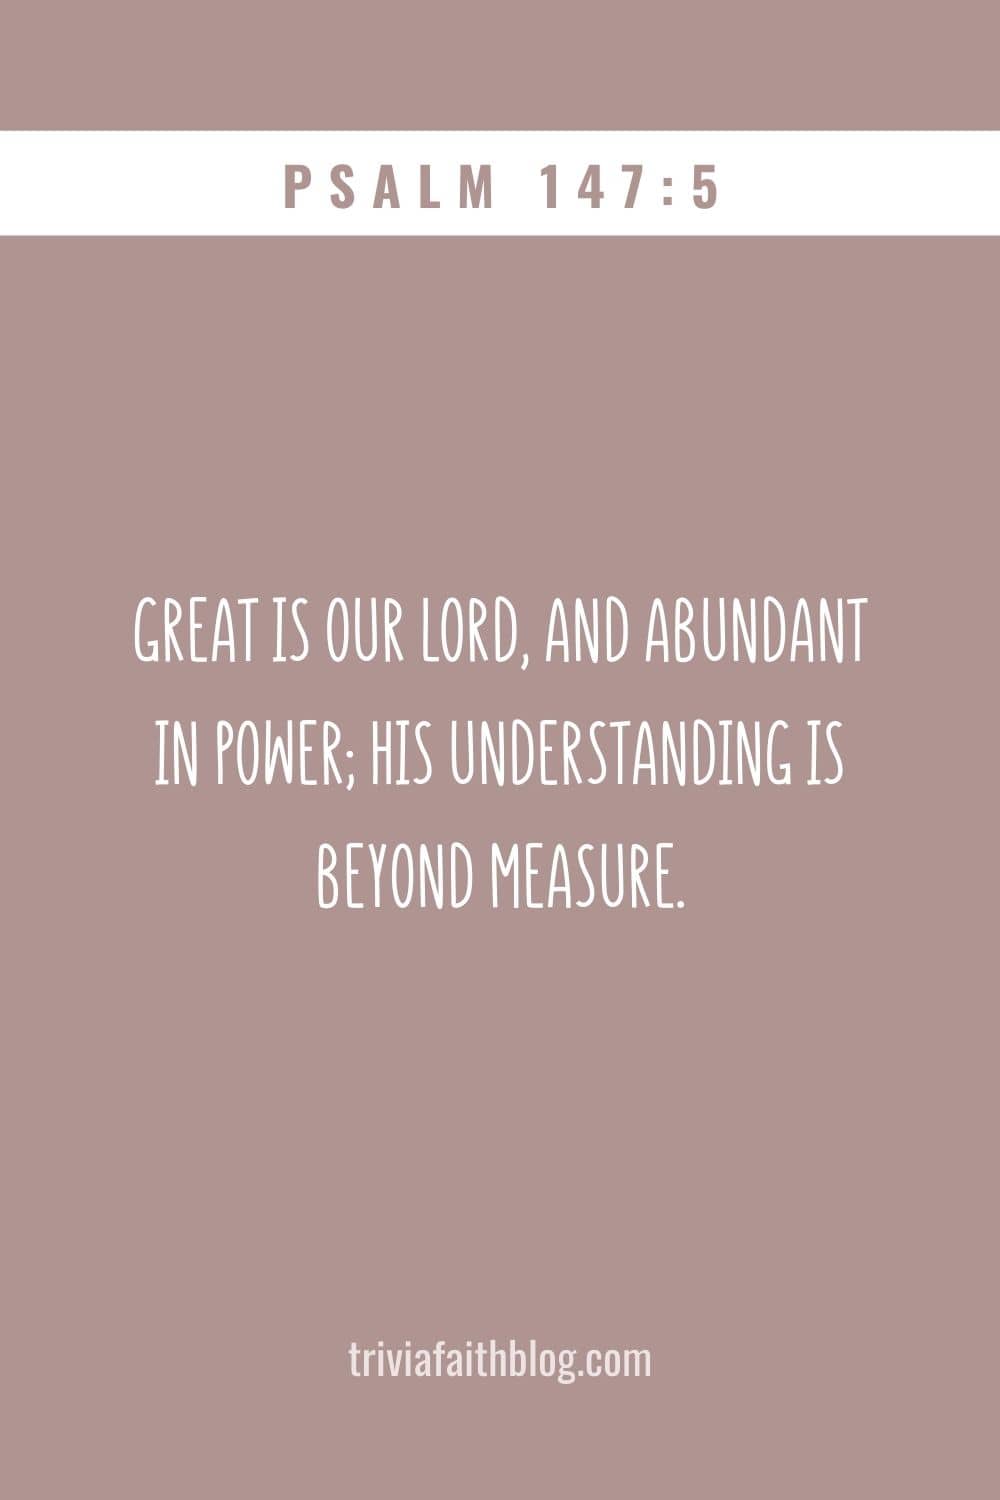 Great is our Lord, and abundant in power